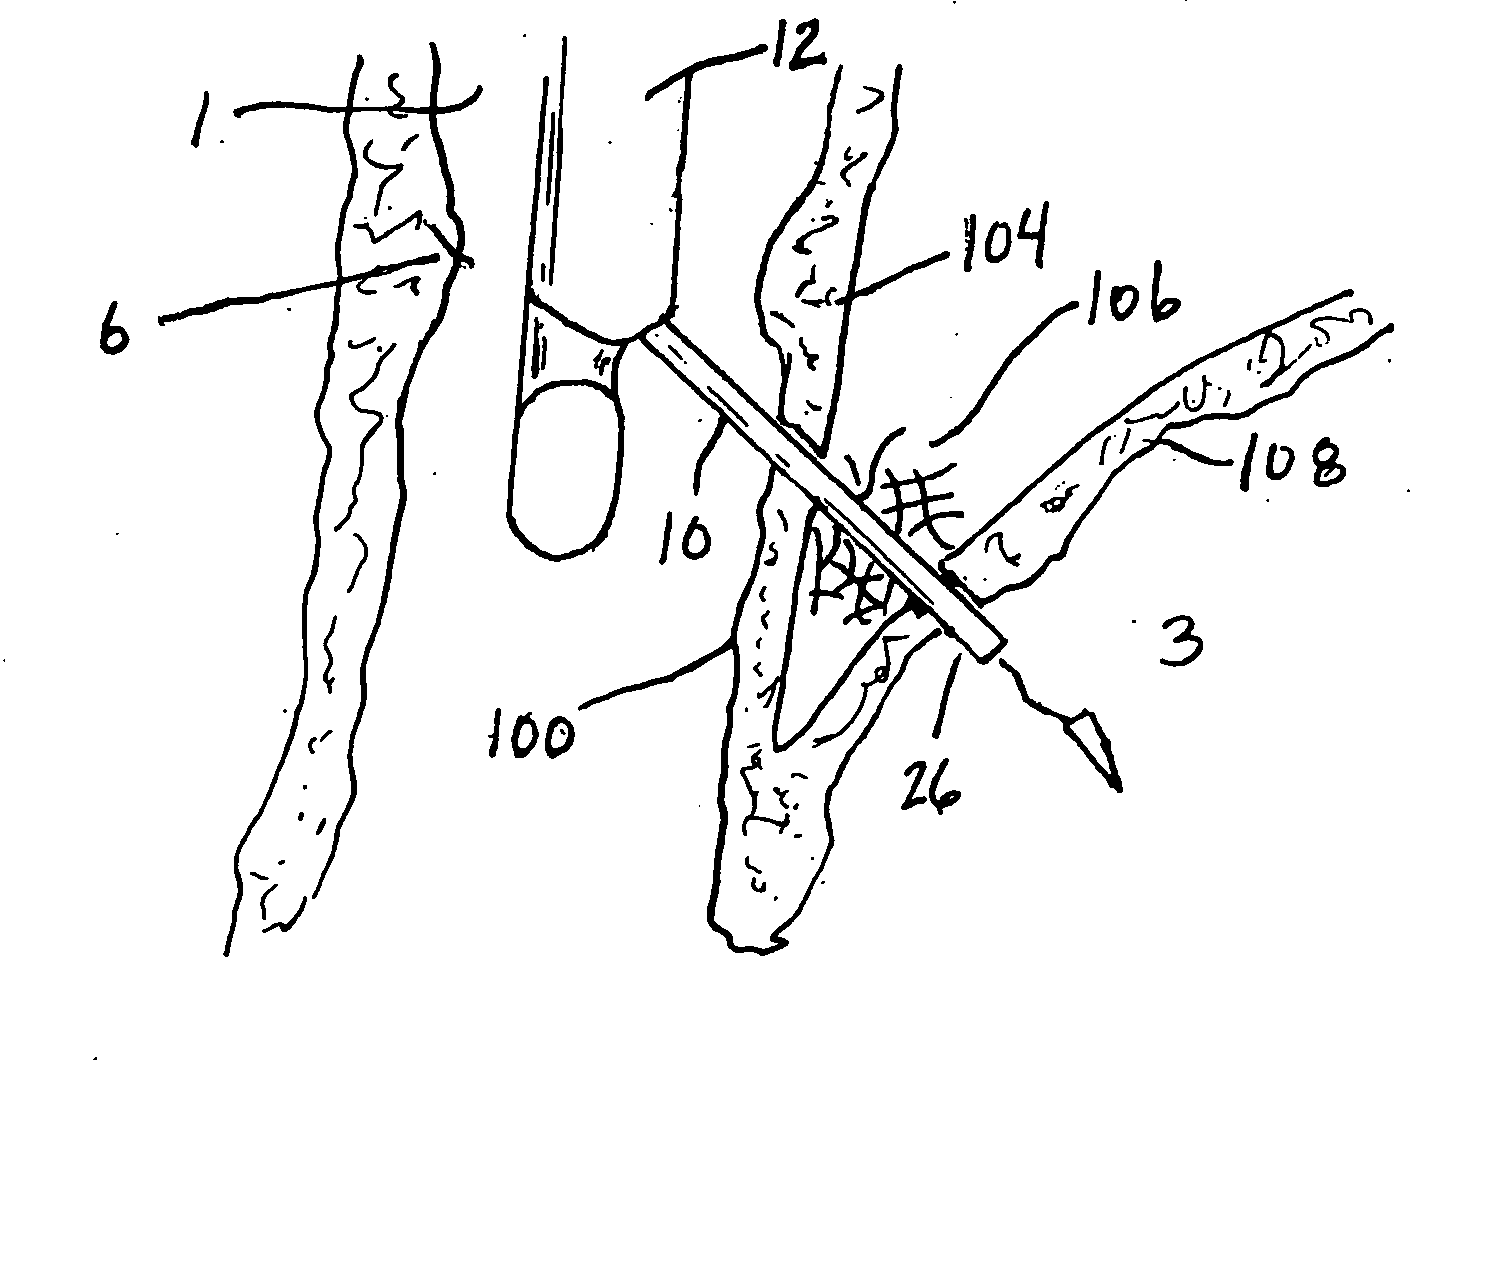 Methods and devices for anchoring to tissue